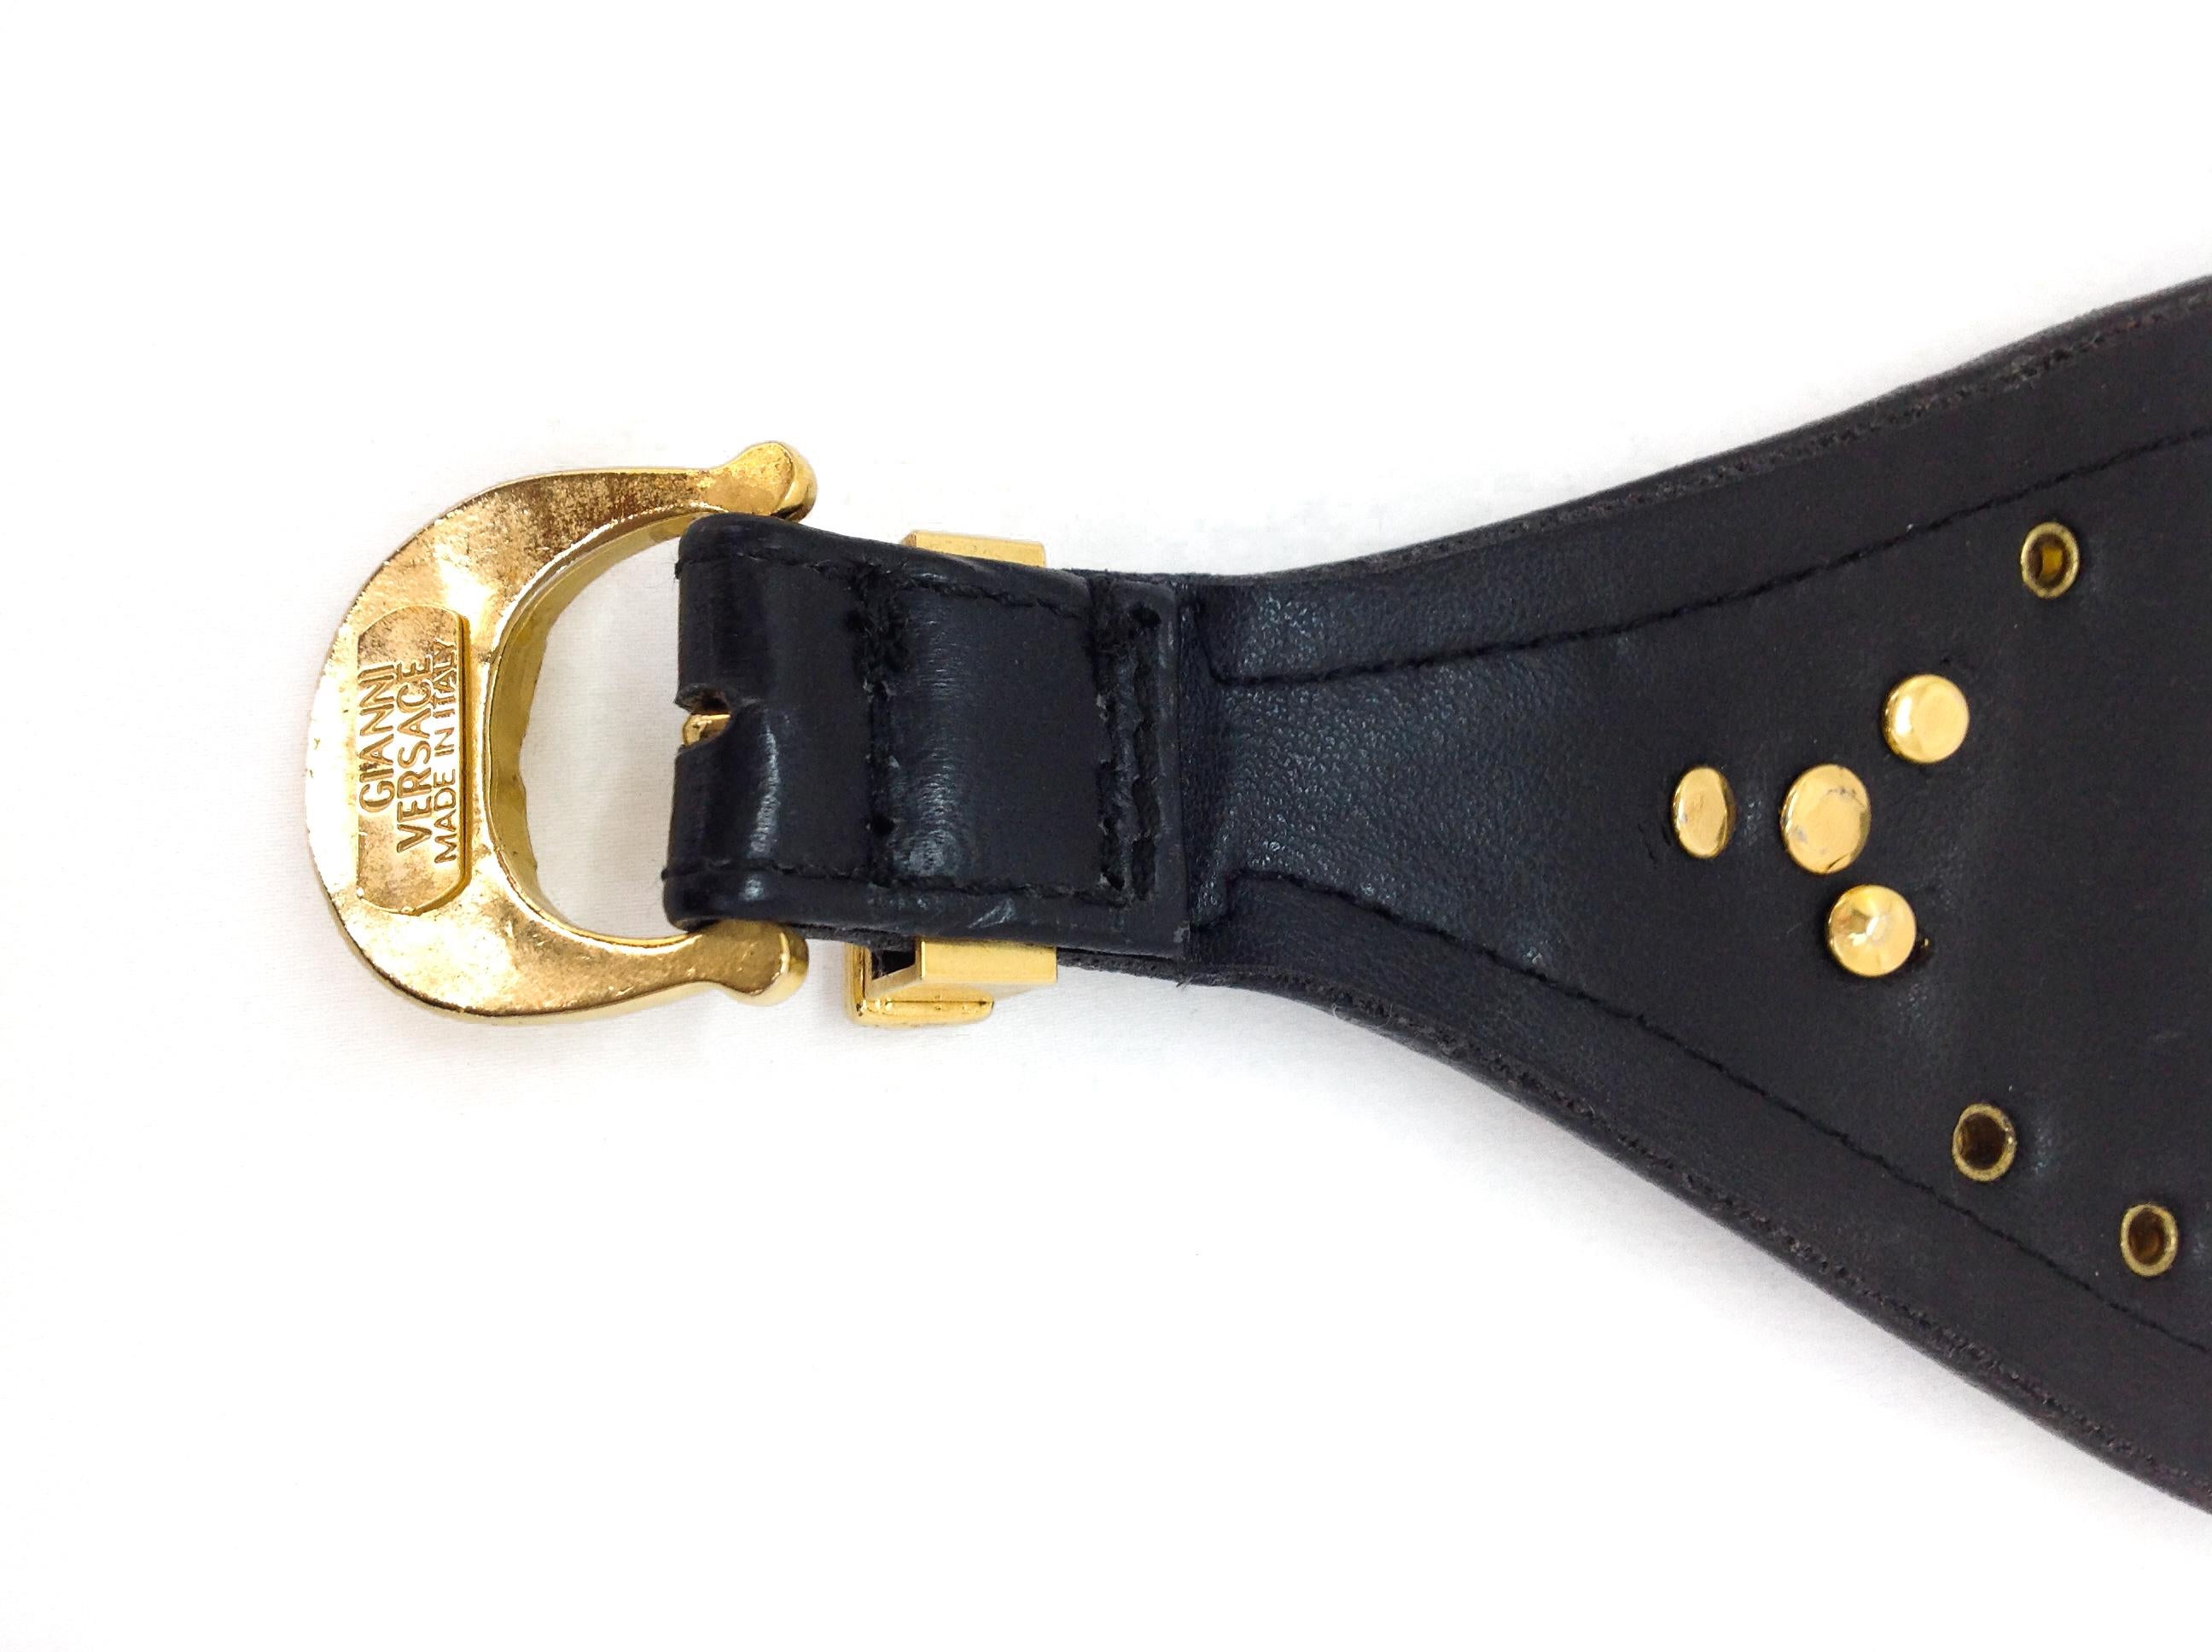 GIANNI VERSACE Bracelet Vintage 1990s Leather Cuff Miami Collection 1993 4